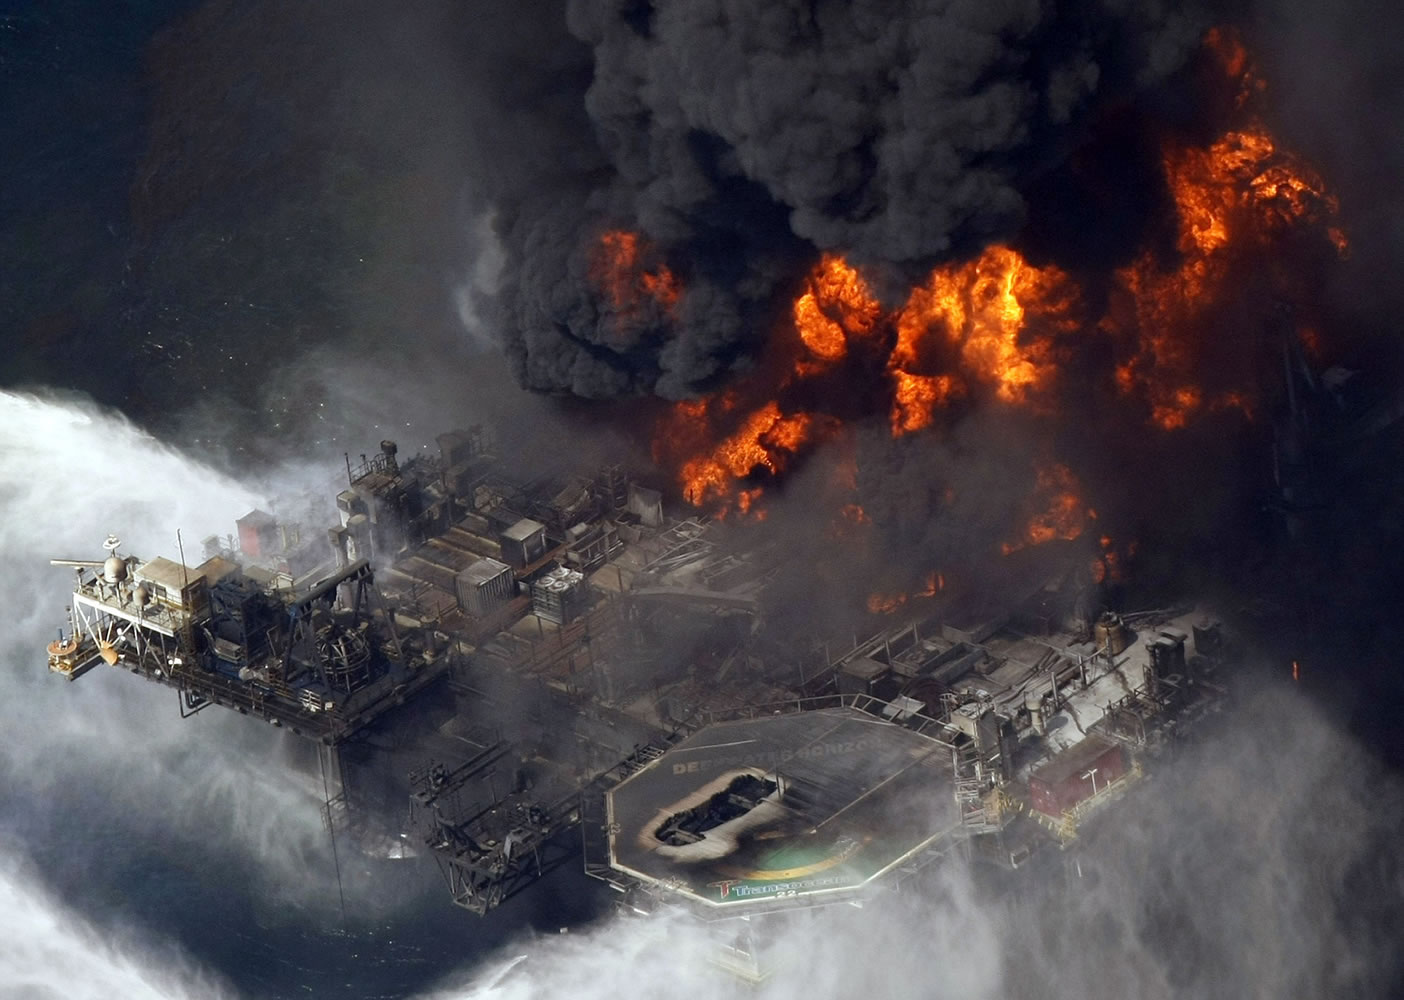 The Deepwater Horizon oil rig burns in 2010 in the Gulf of Mexico, more than 50 miles southeast of Venice, La.